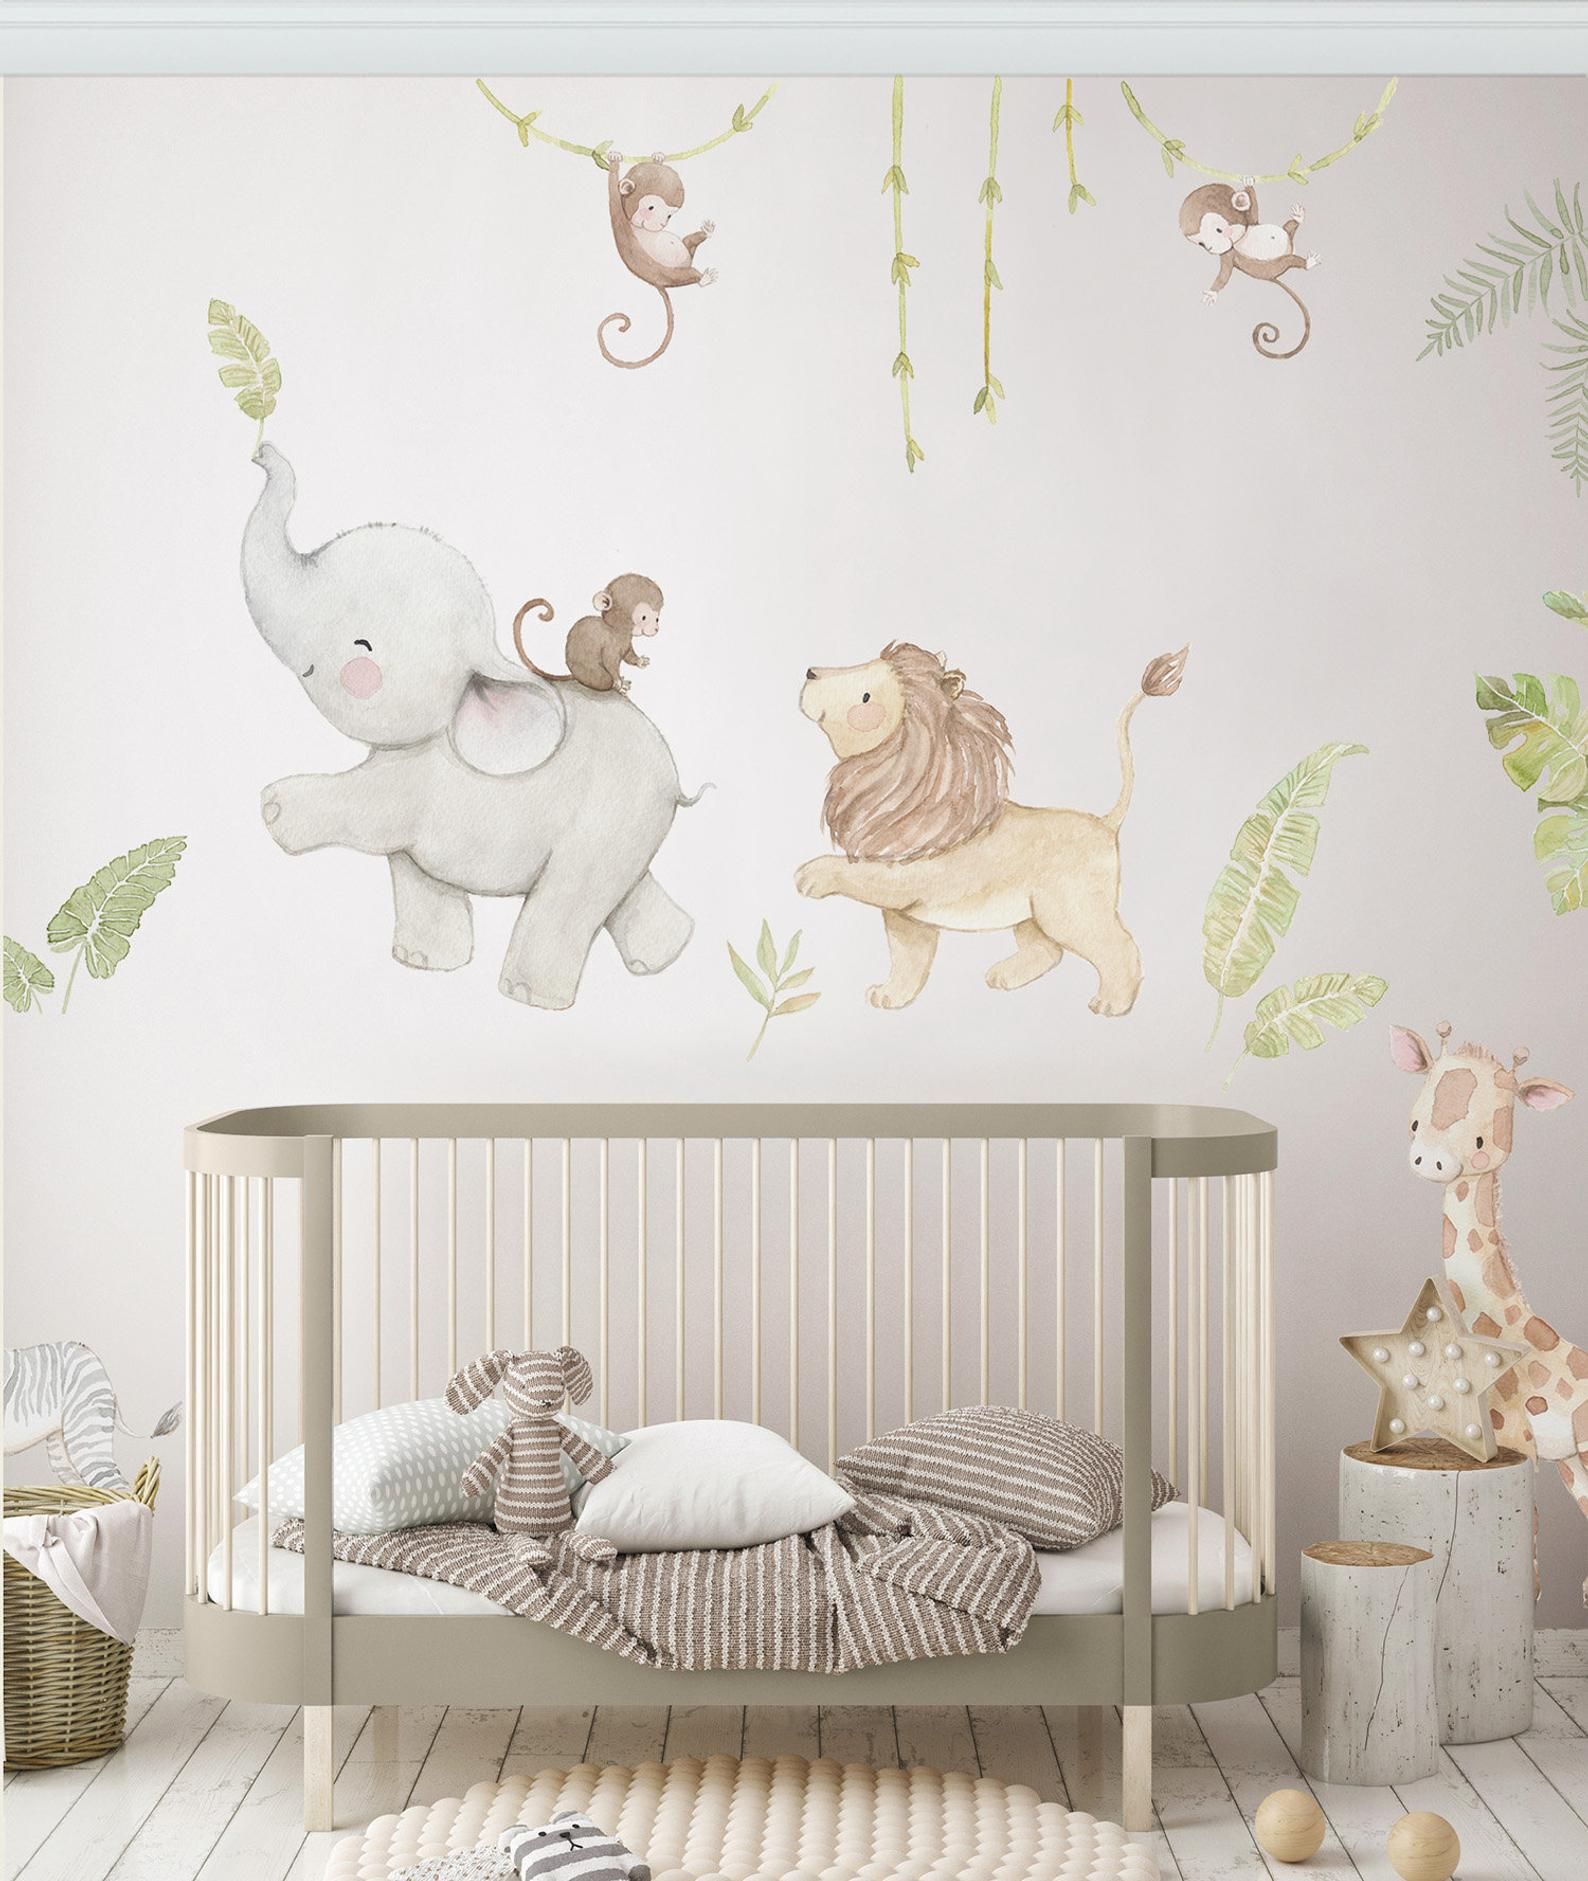 Nursery Decals Create Beauty in the  Environment